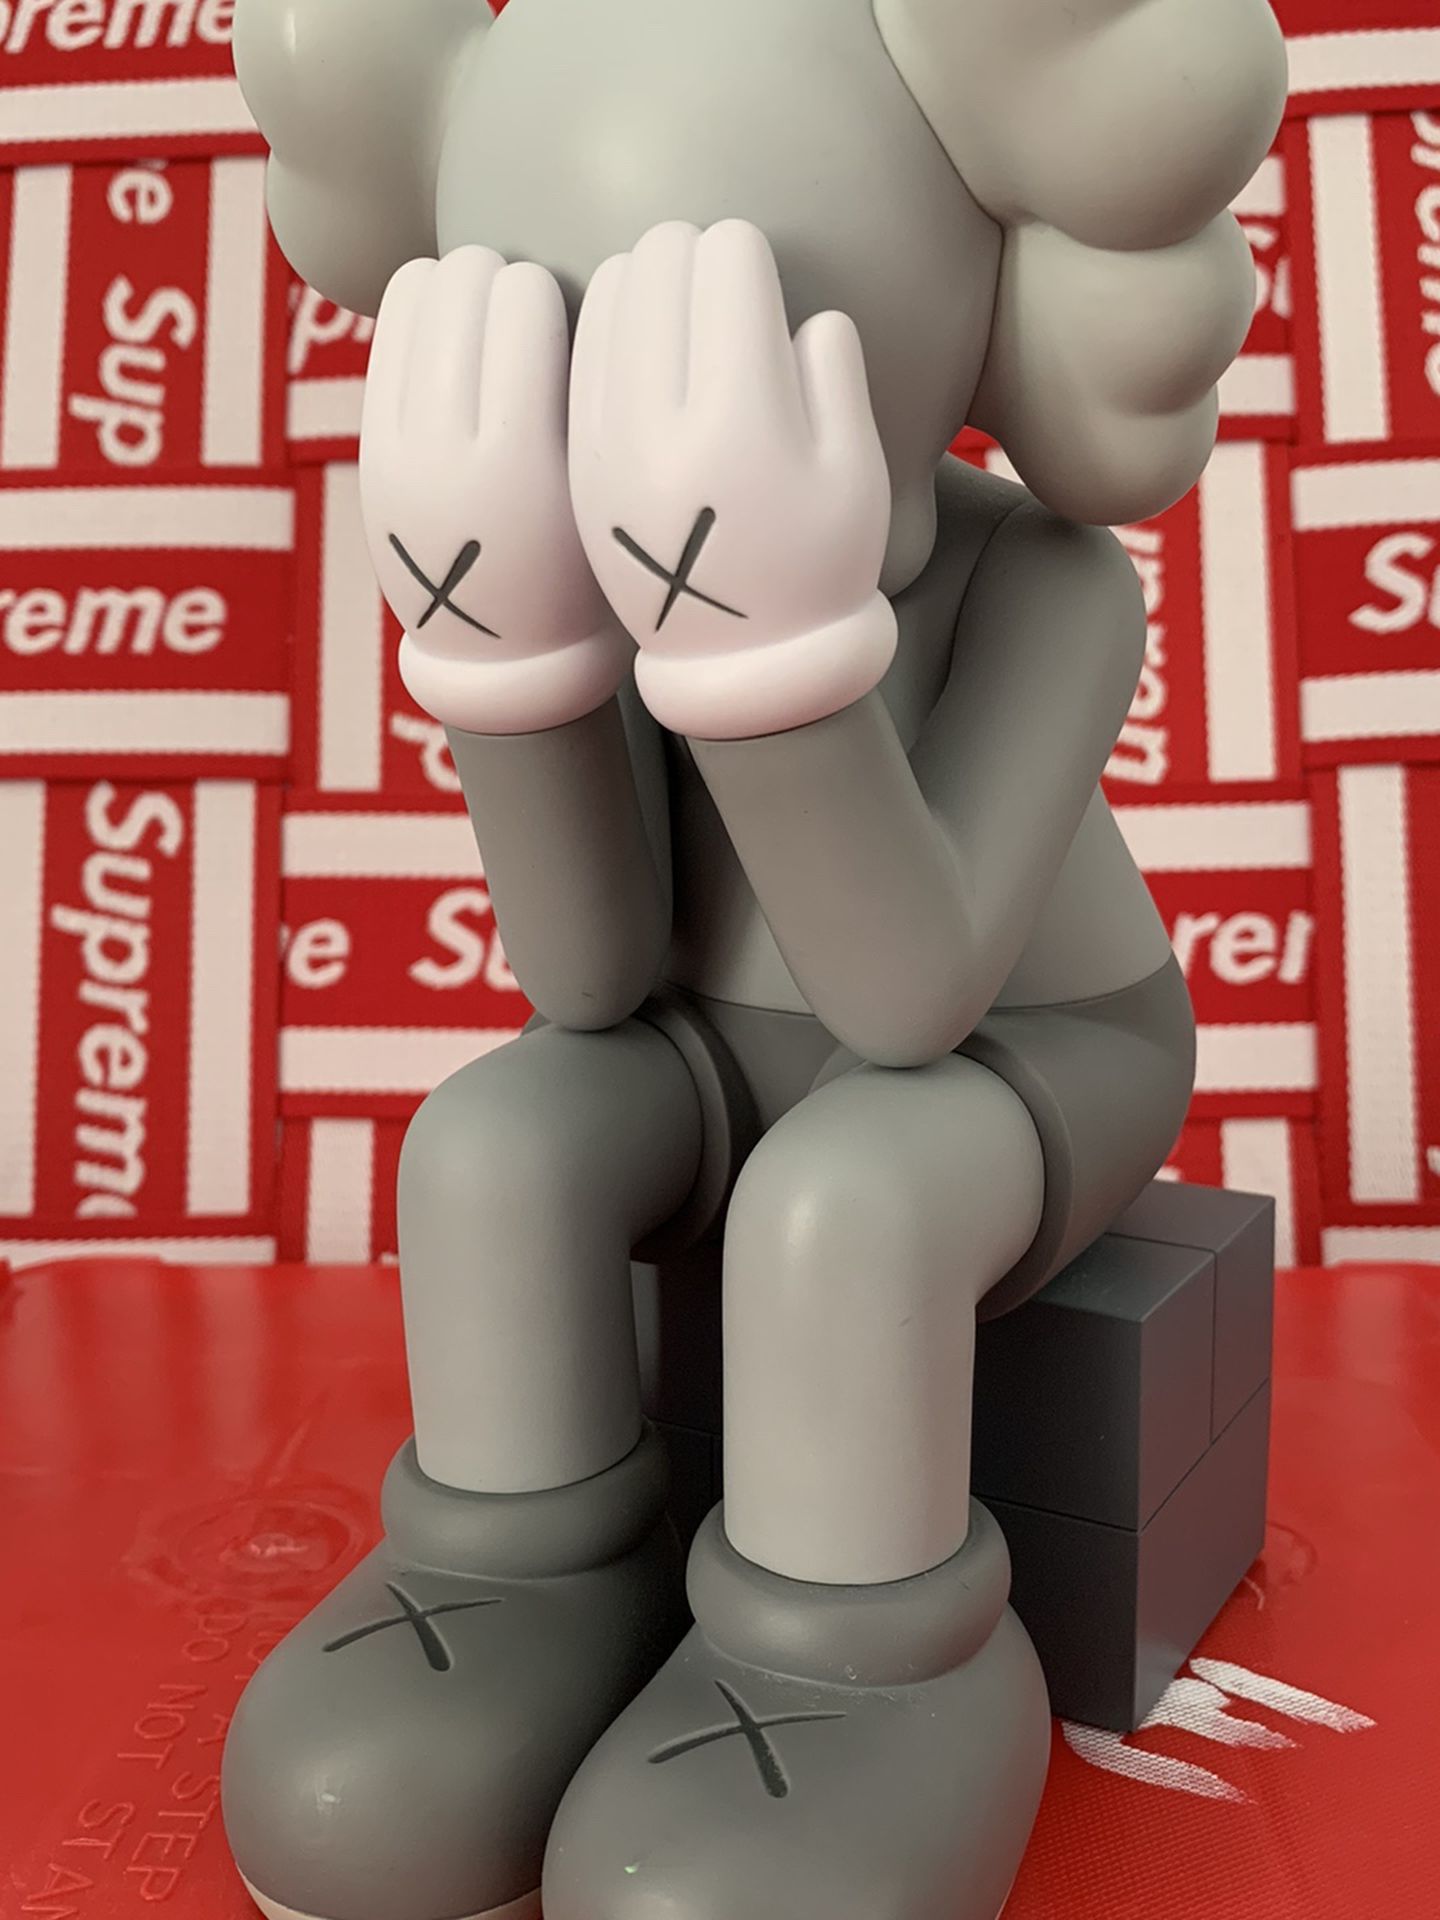 KAWS “Passing through” Open Edition (100% Authentic)